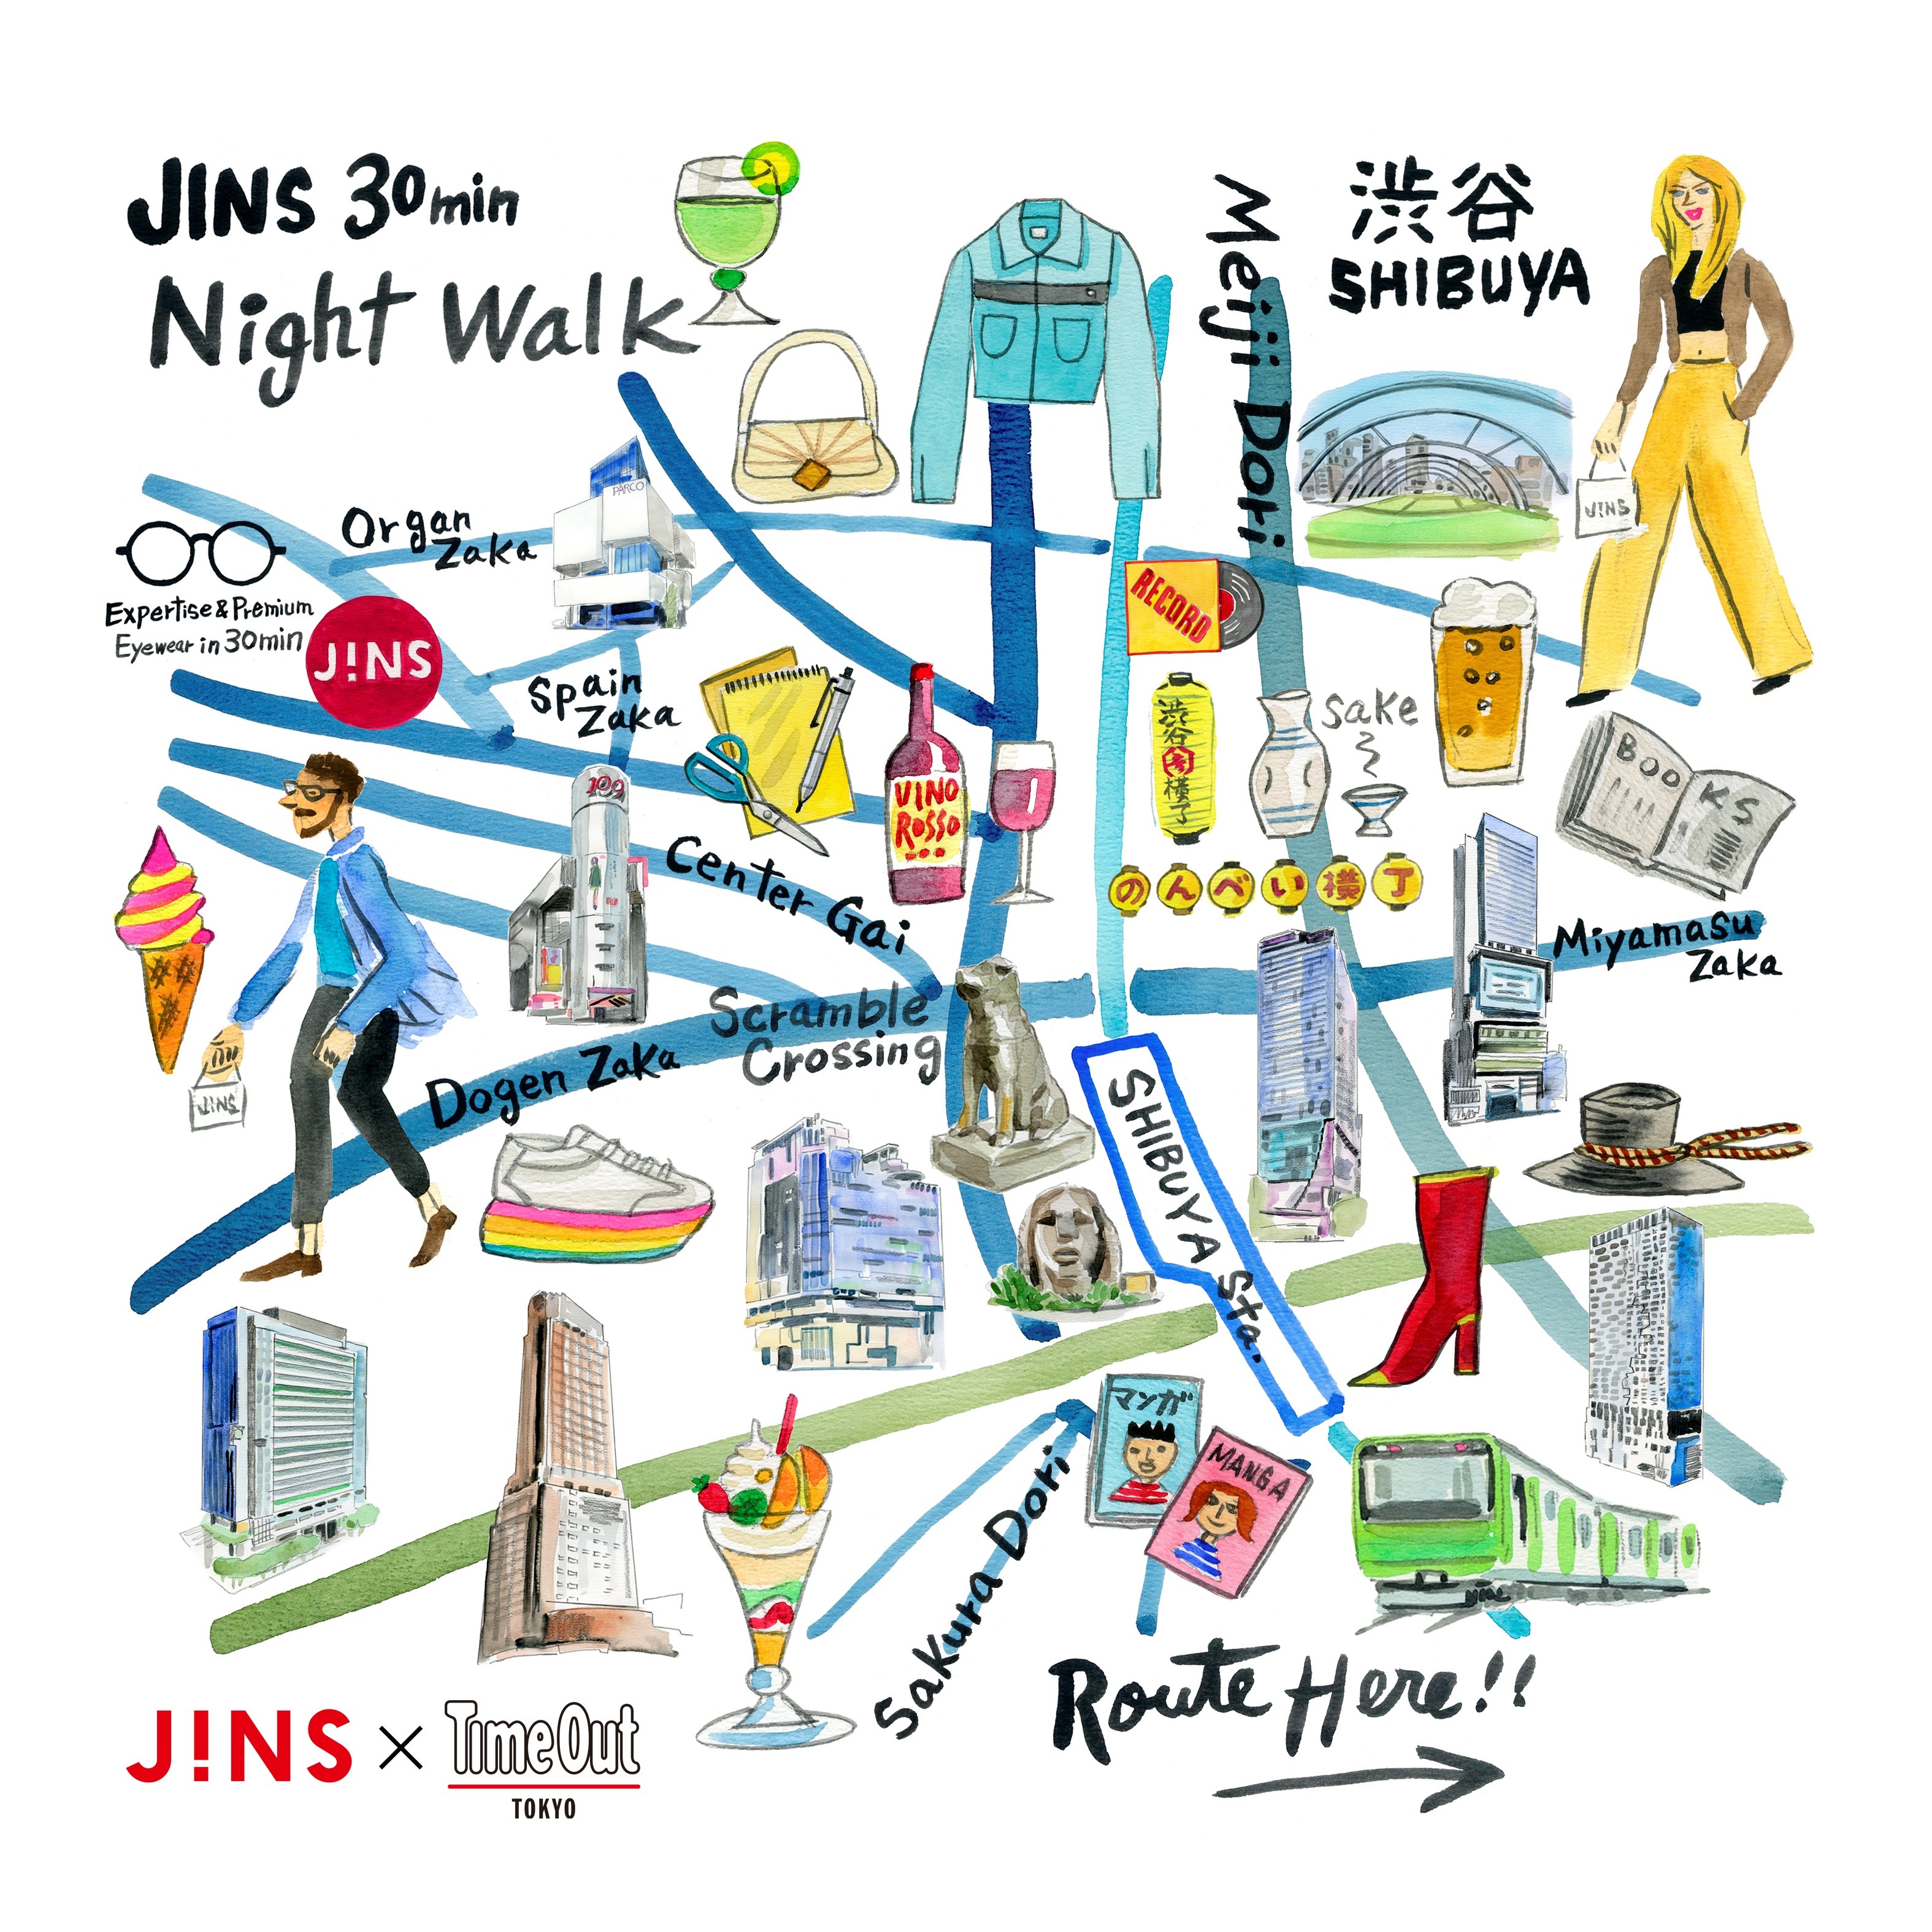 Enjoy Night in Japan campaign